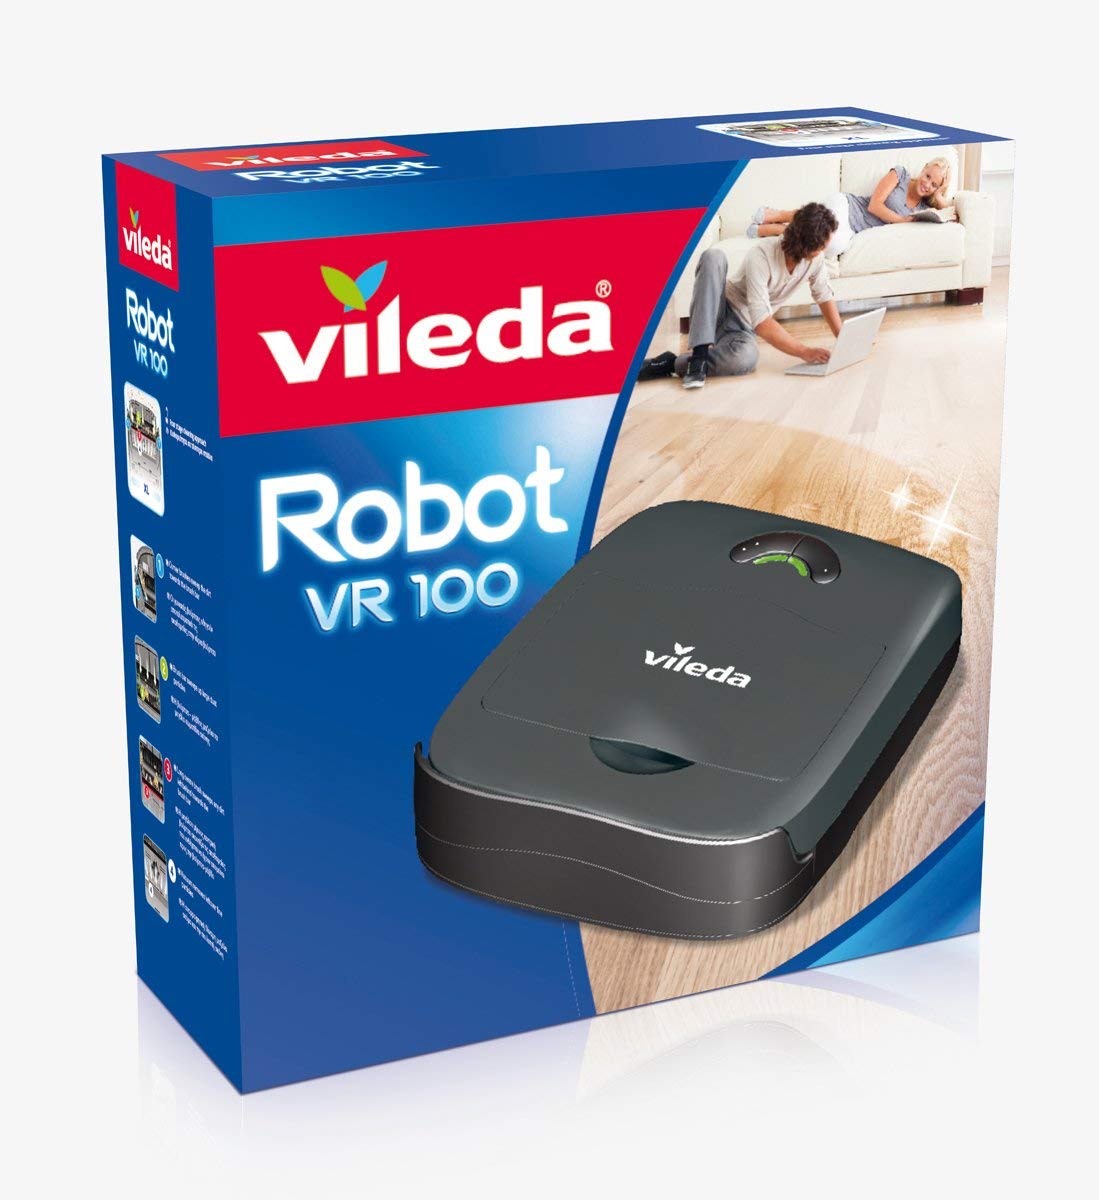 Munching snor moed Vileda VR 100, Robotic Cleaners Reviews and Comments